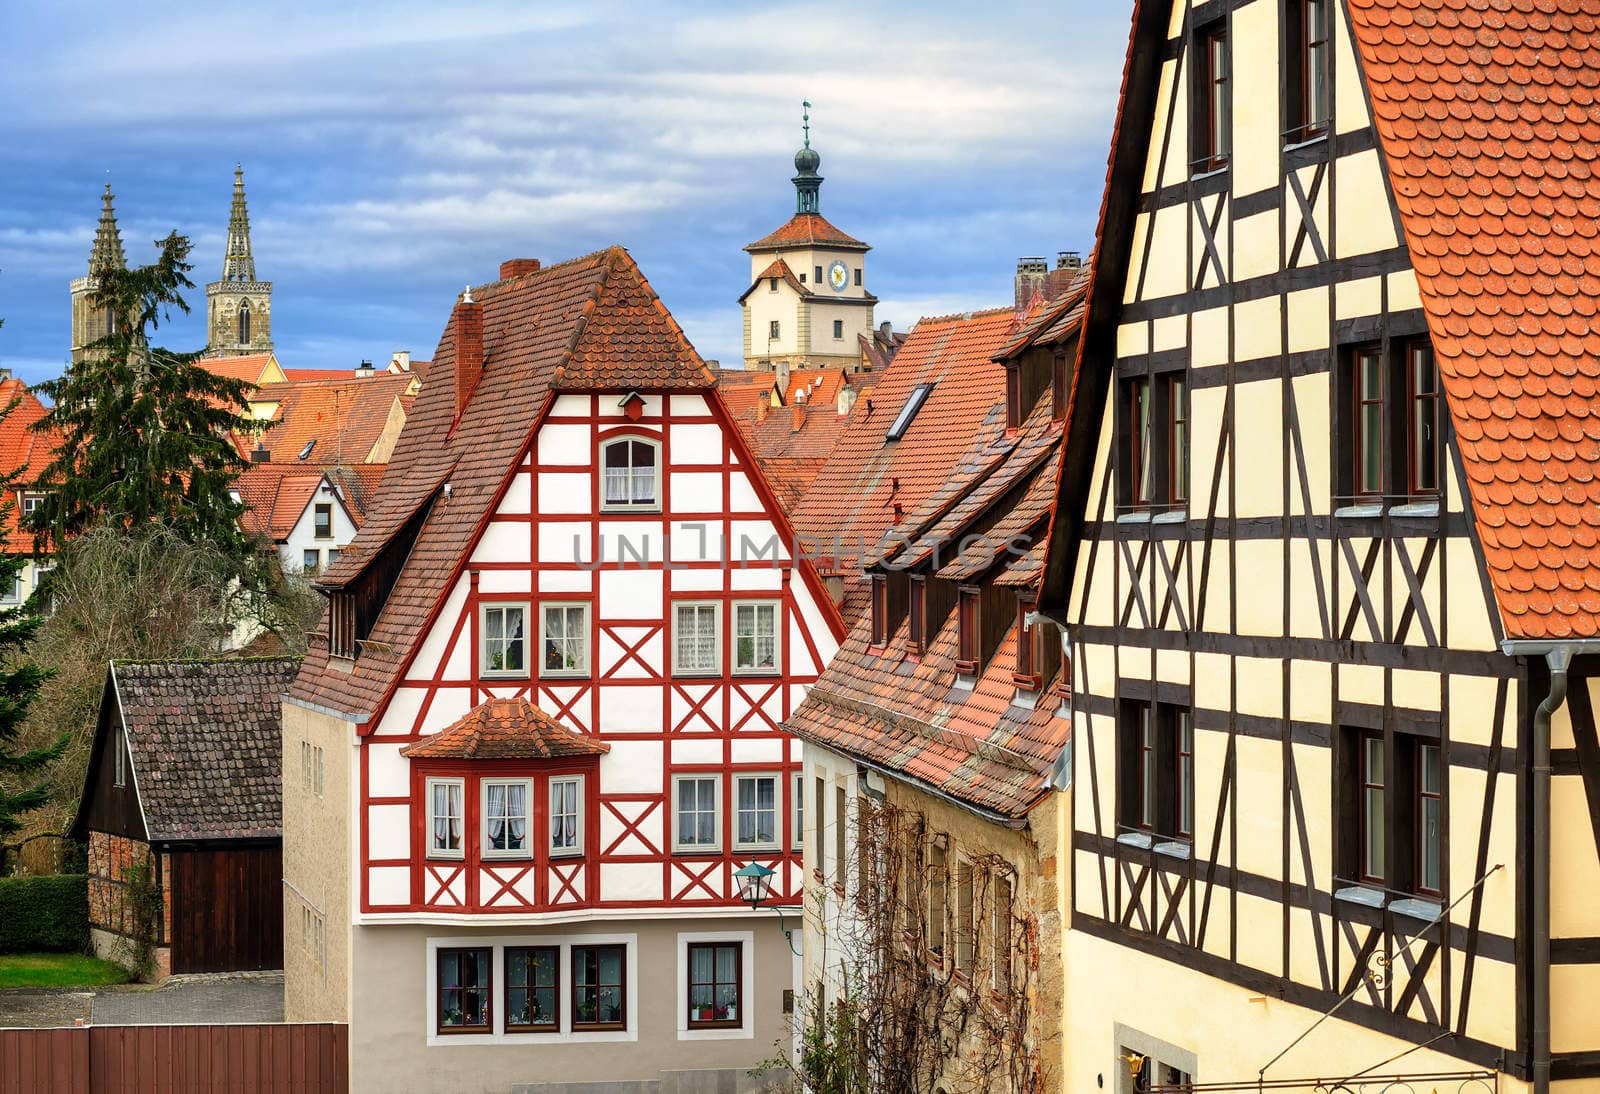 Traditional red tile roofs and half-timbered houses in Rothenbur by GlobePhotos